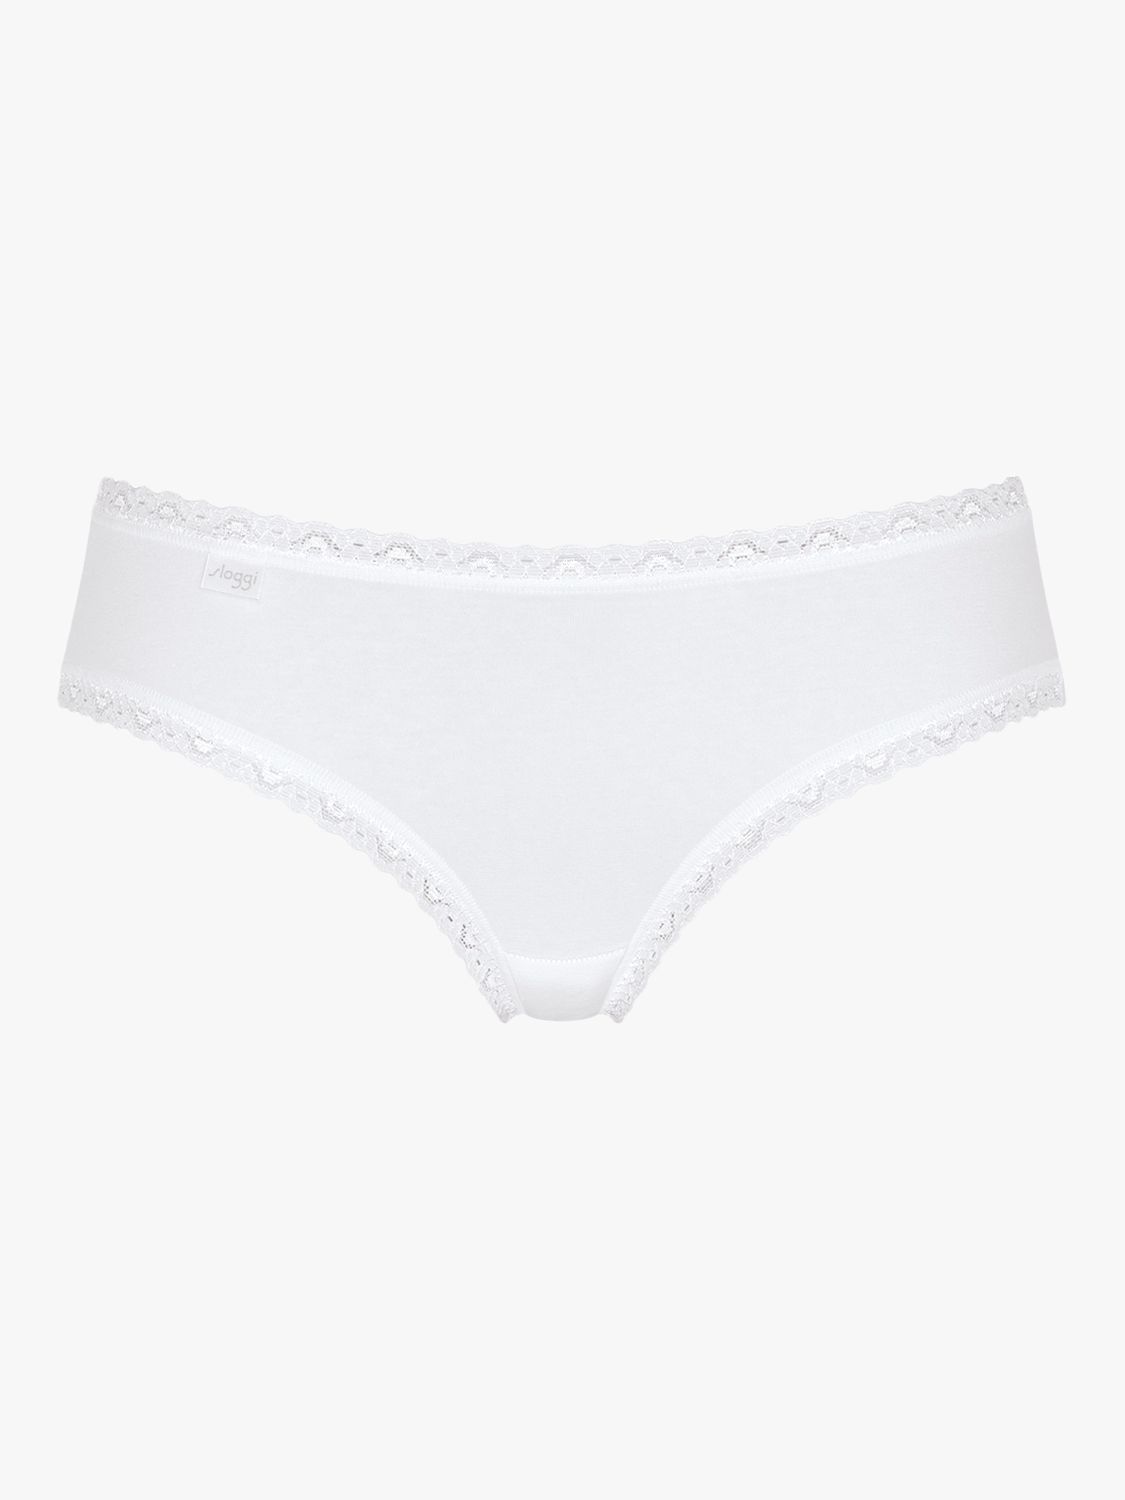 sloggi 24/7 Weekend Hipster Knickers, Pack of 3, White - Light Combination, 8